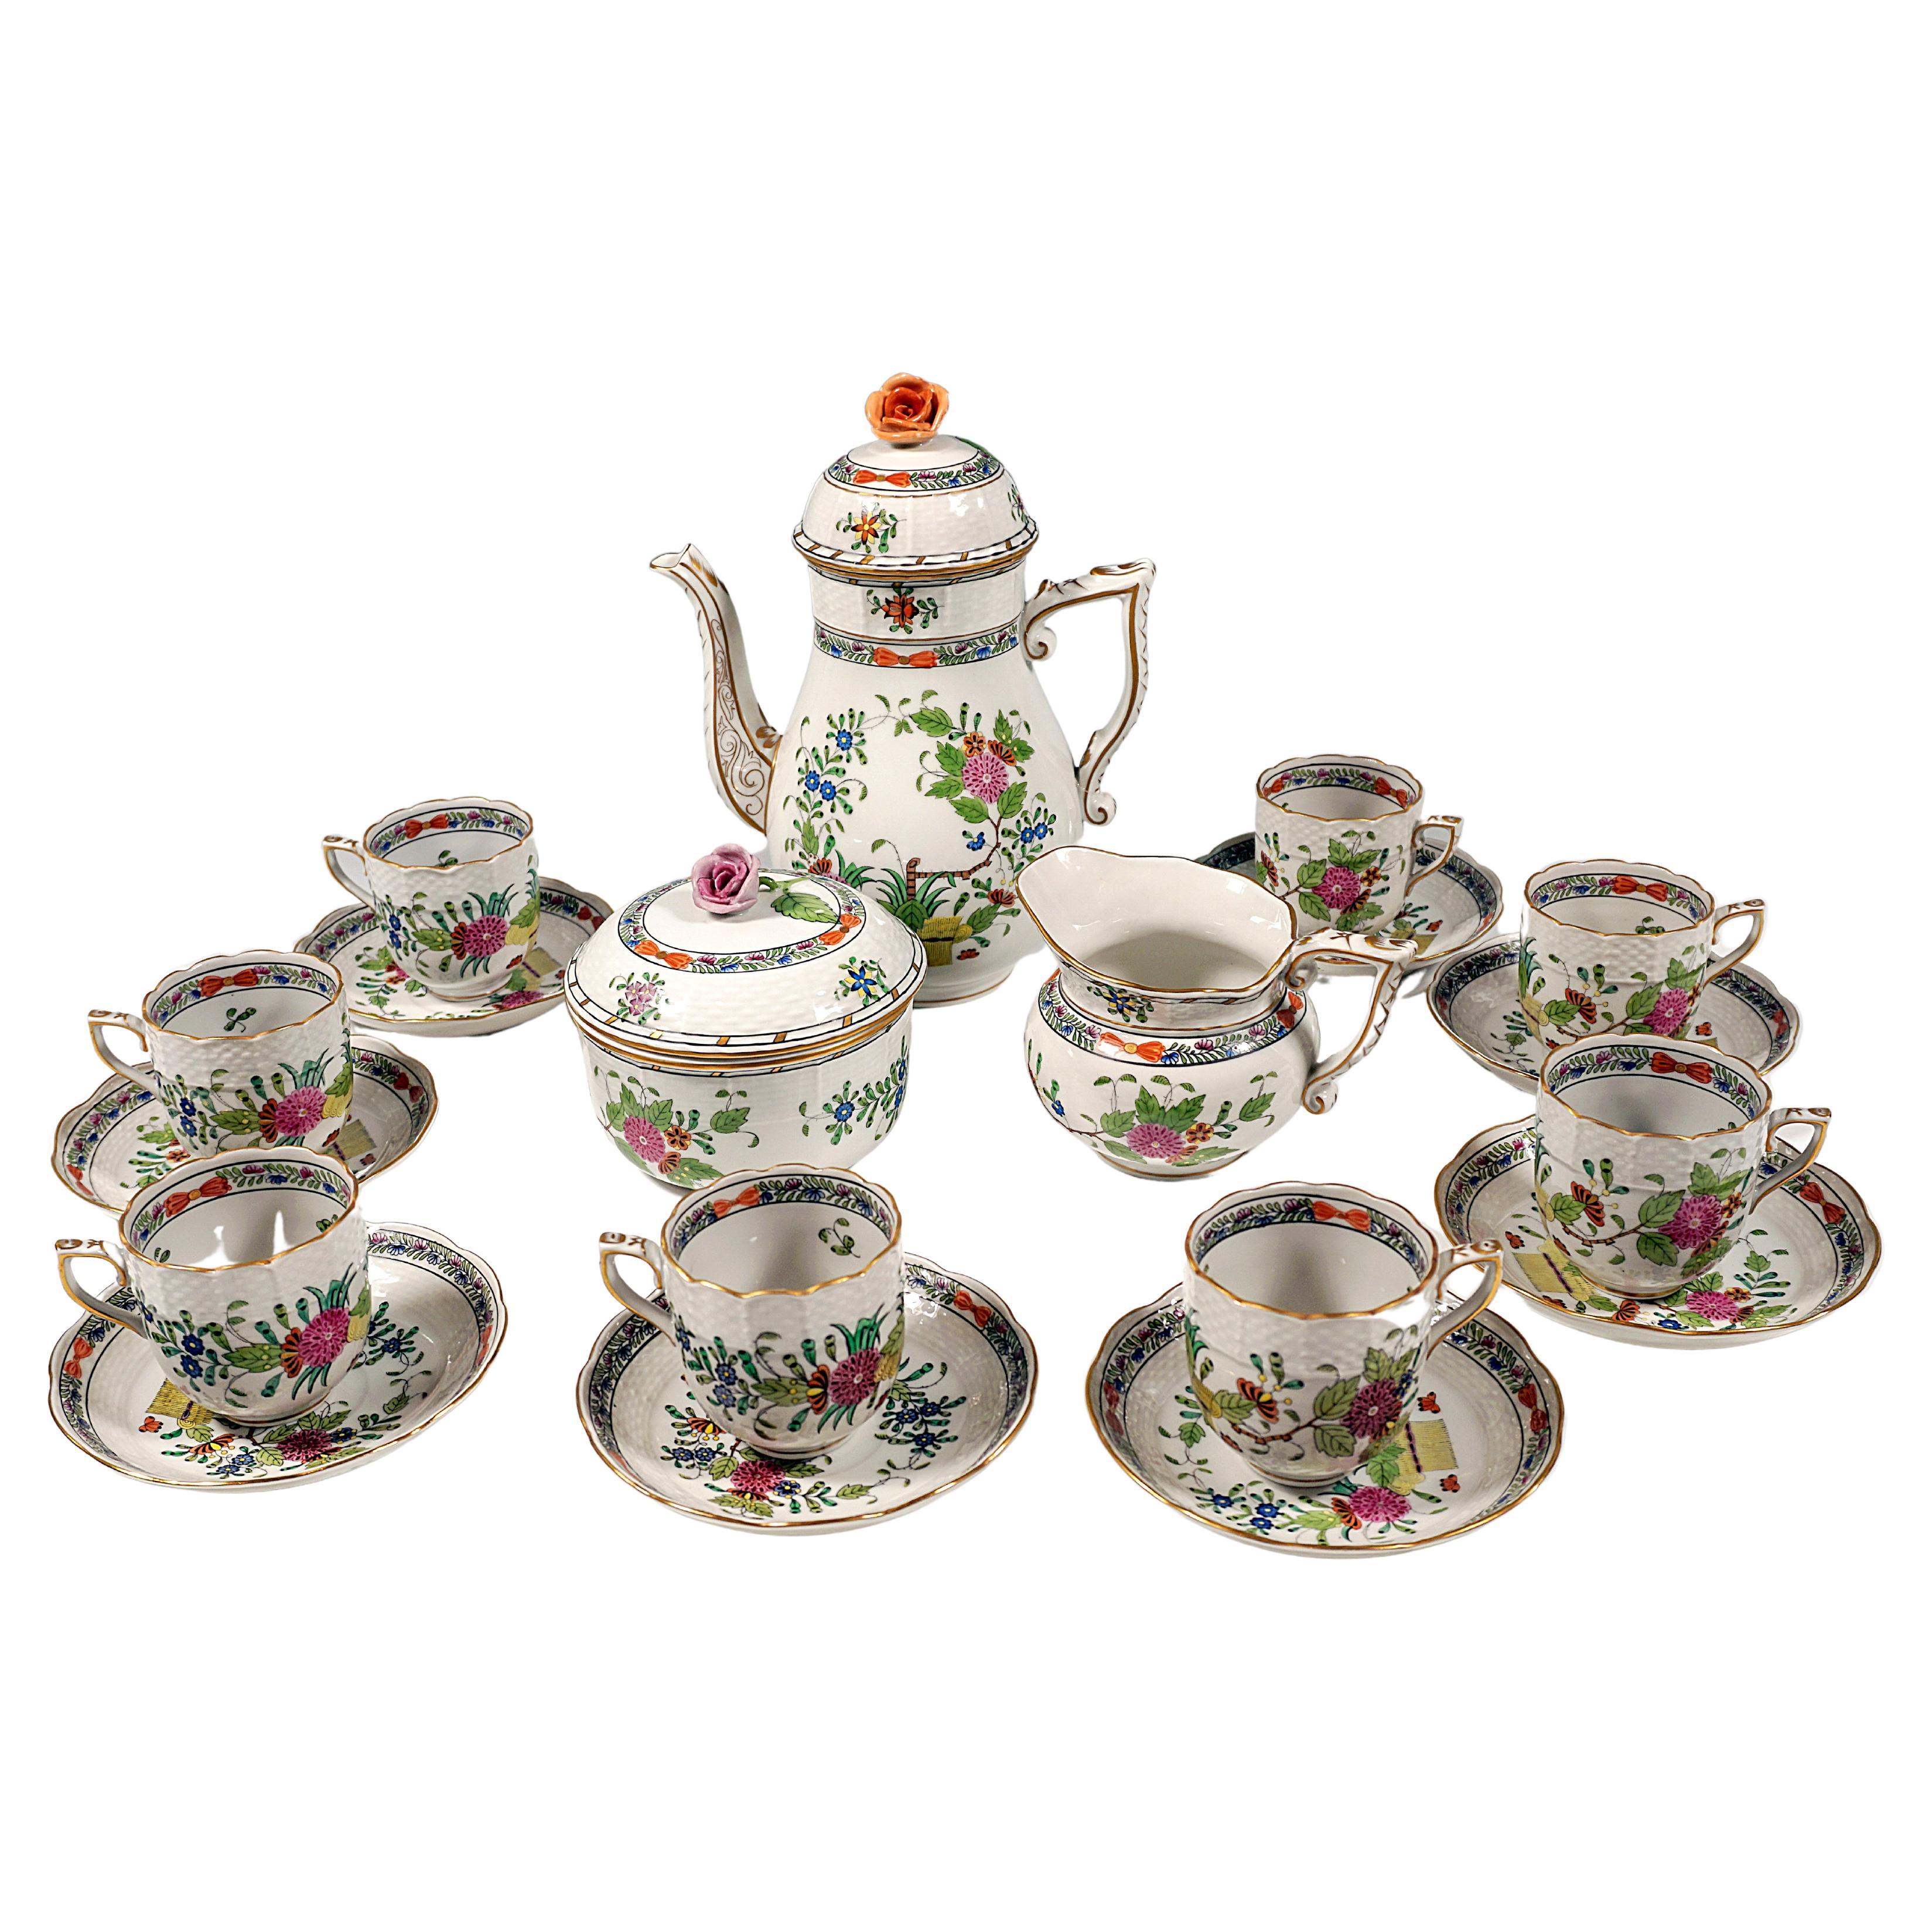 Fleurs Des Indes Coffee Set For 8 Persons Herend Hungary 20th Century For Sale